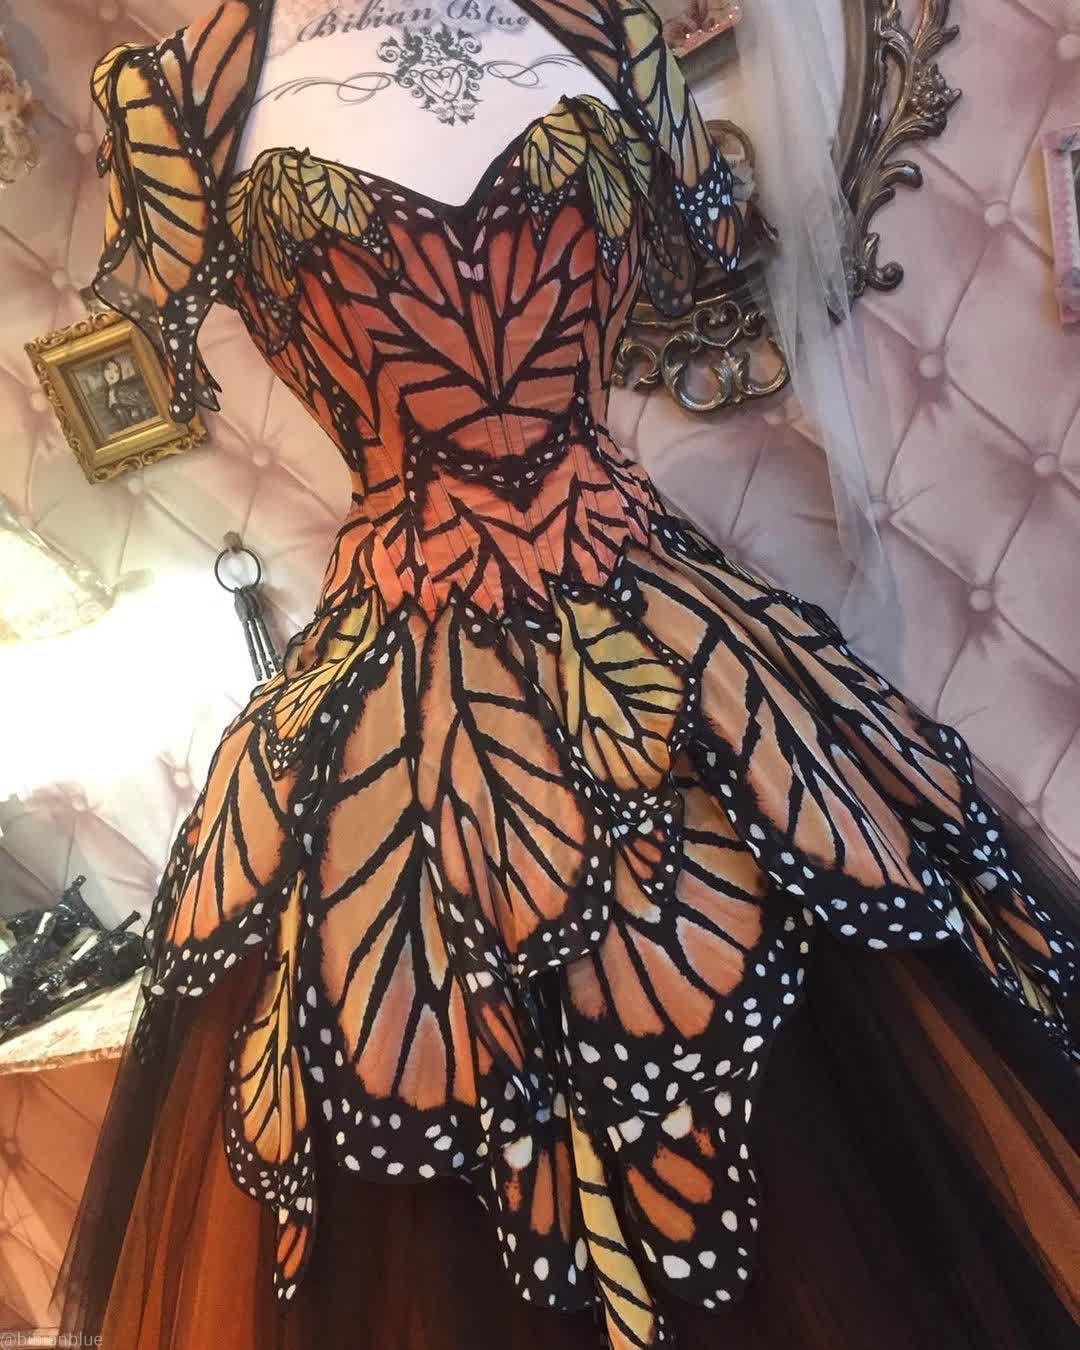 The Absolutely Stunning Dresses And Corsets Inspired By Butterfly Wings Of Bibian Blue 3